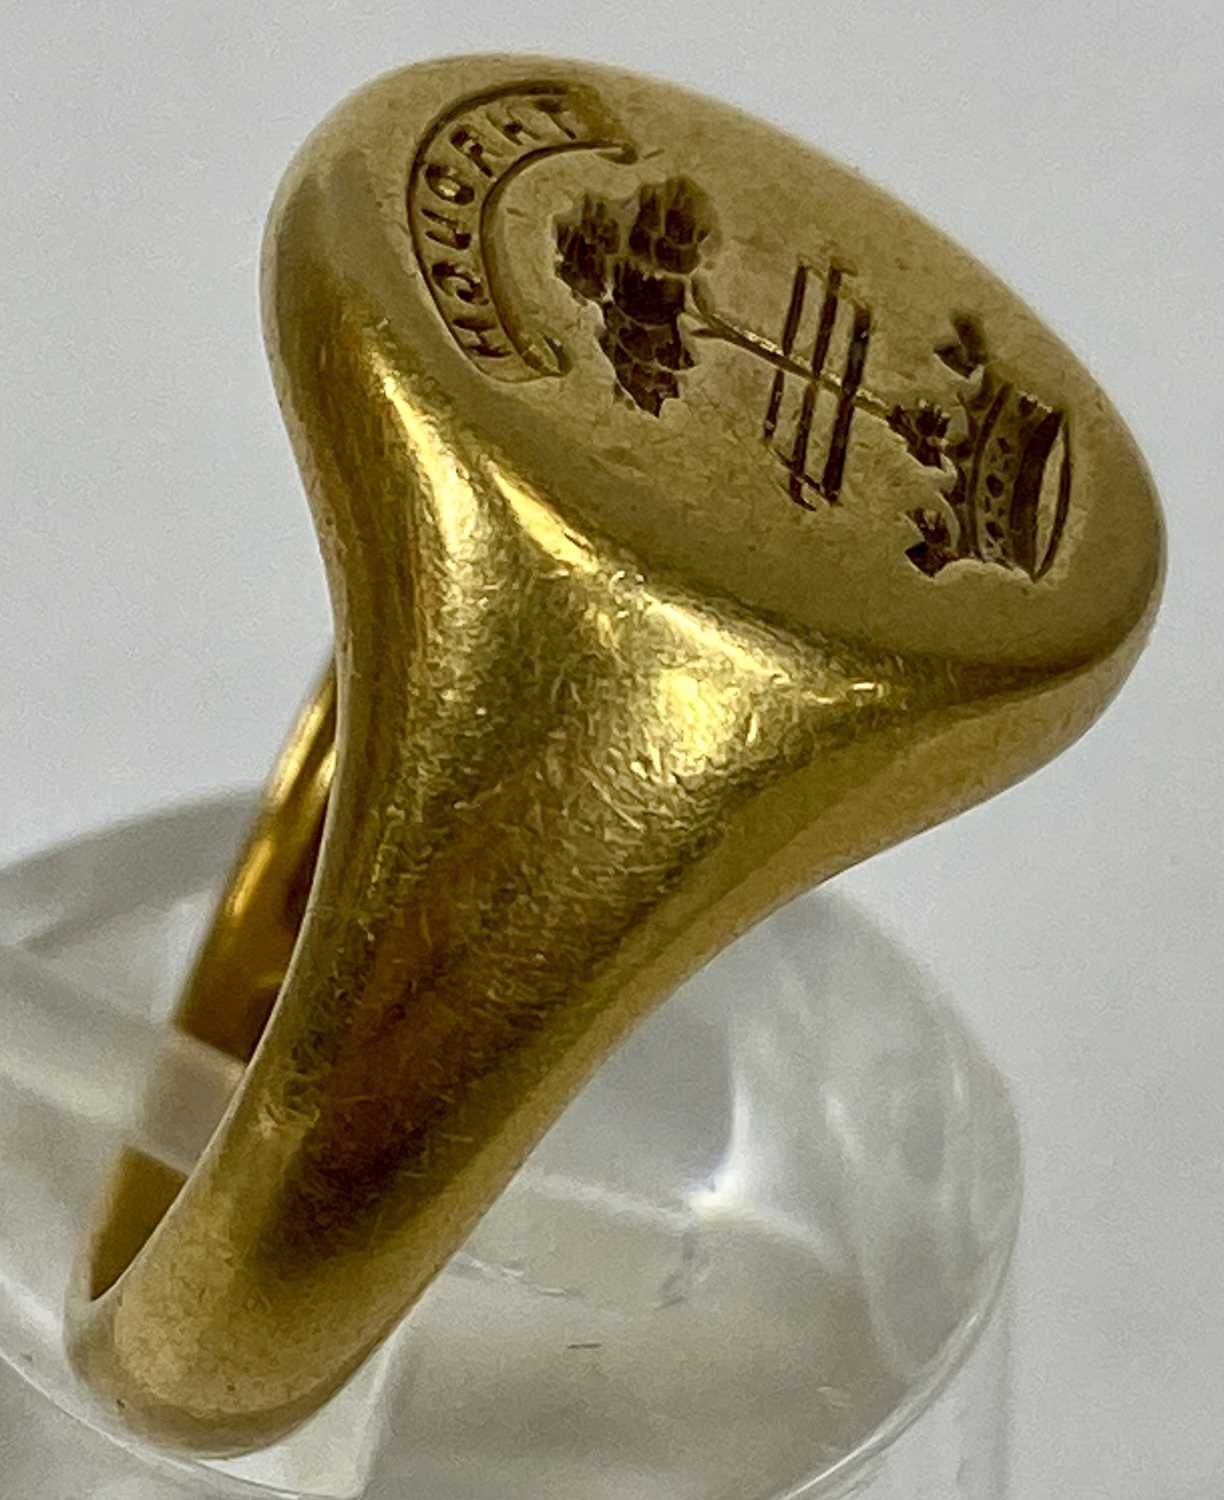 18CT GOLD SIGNET RING, engraved with crest, size M-N, 10.7gms Provenance: private collection Ynys - Image 2 of 4